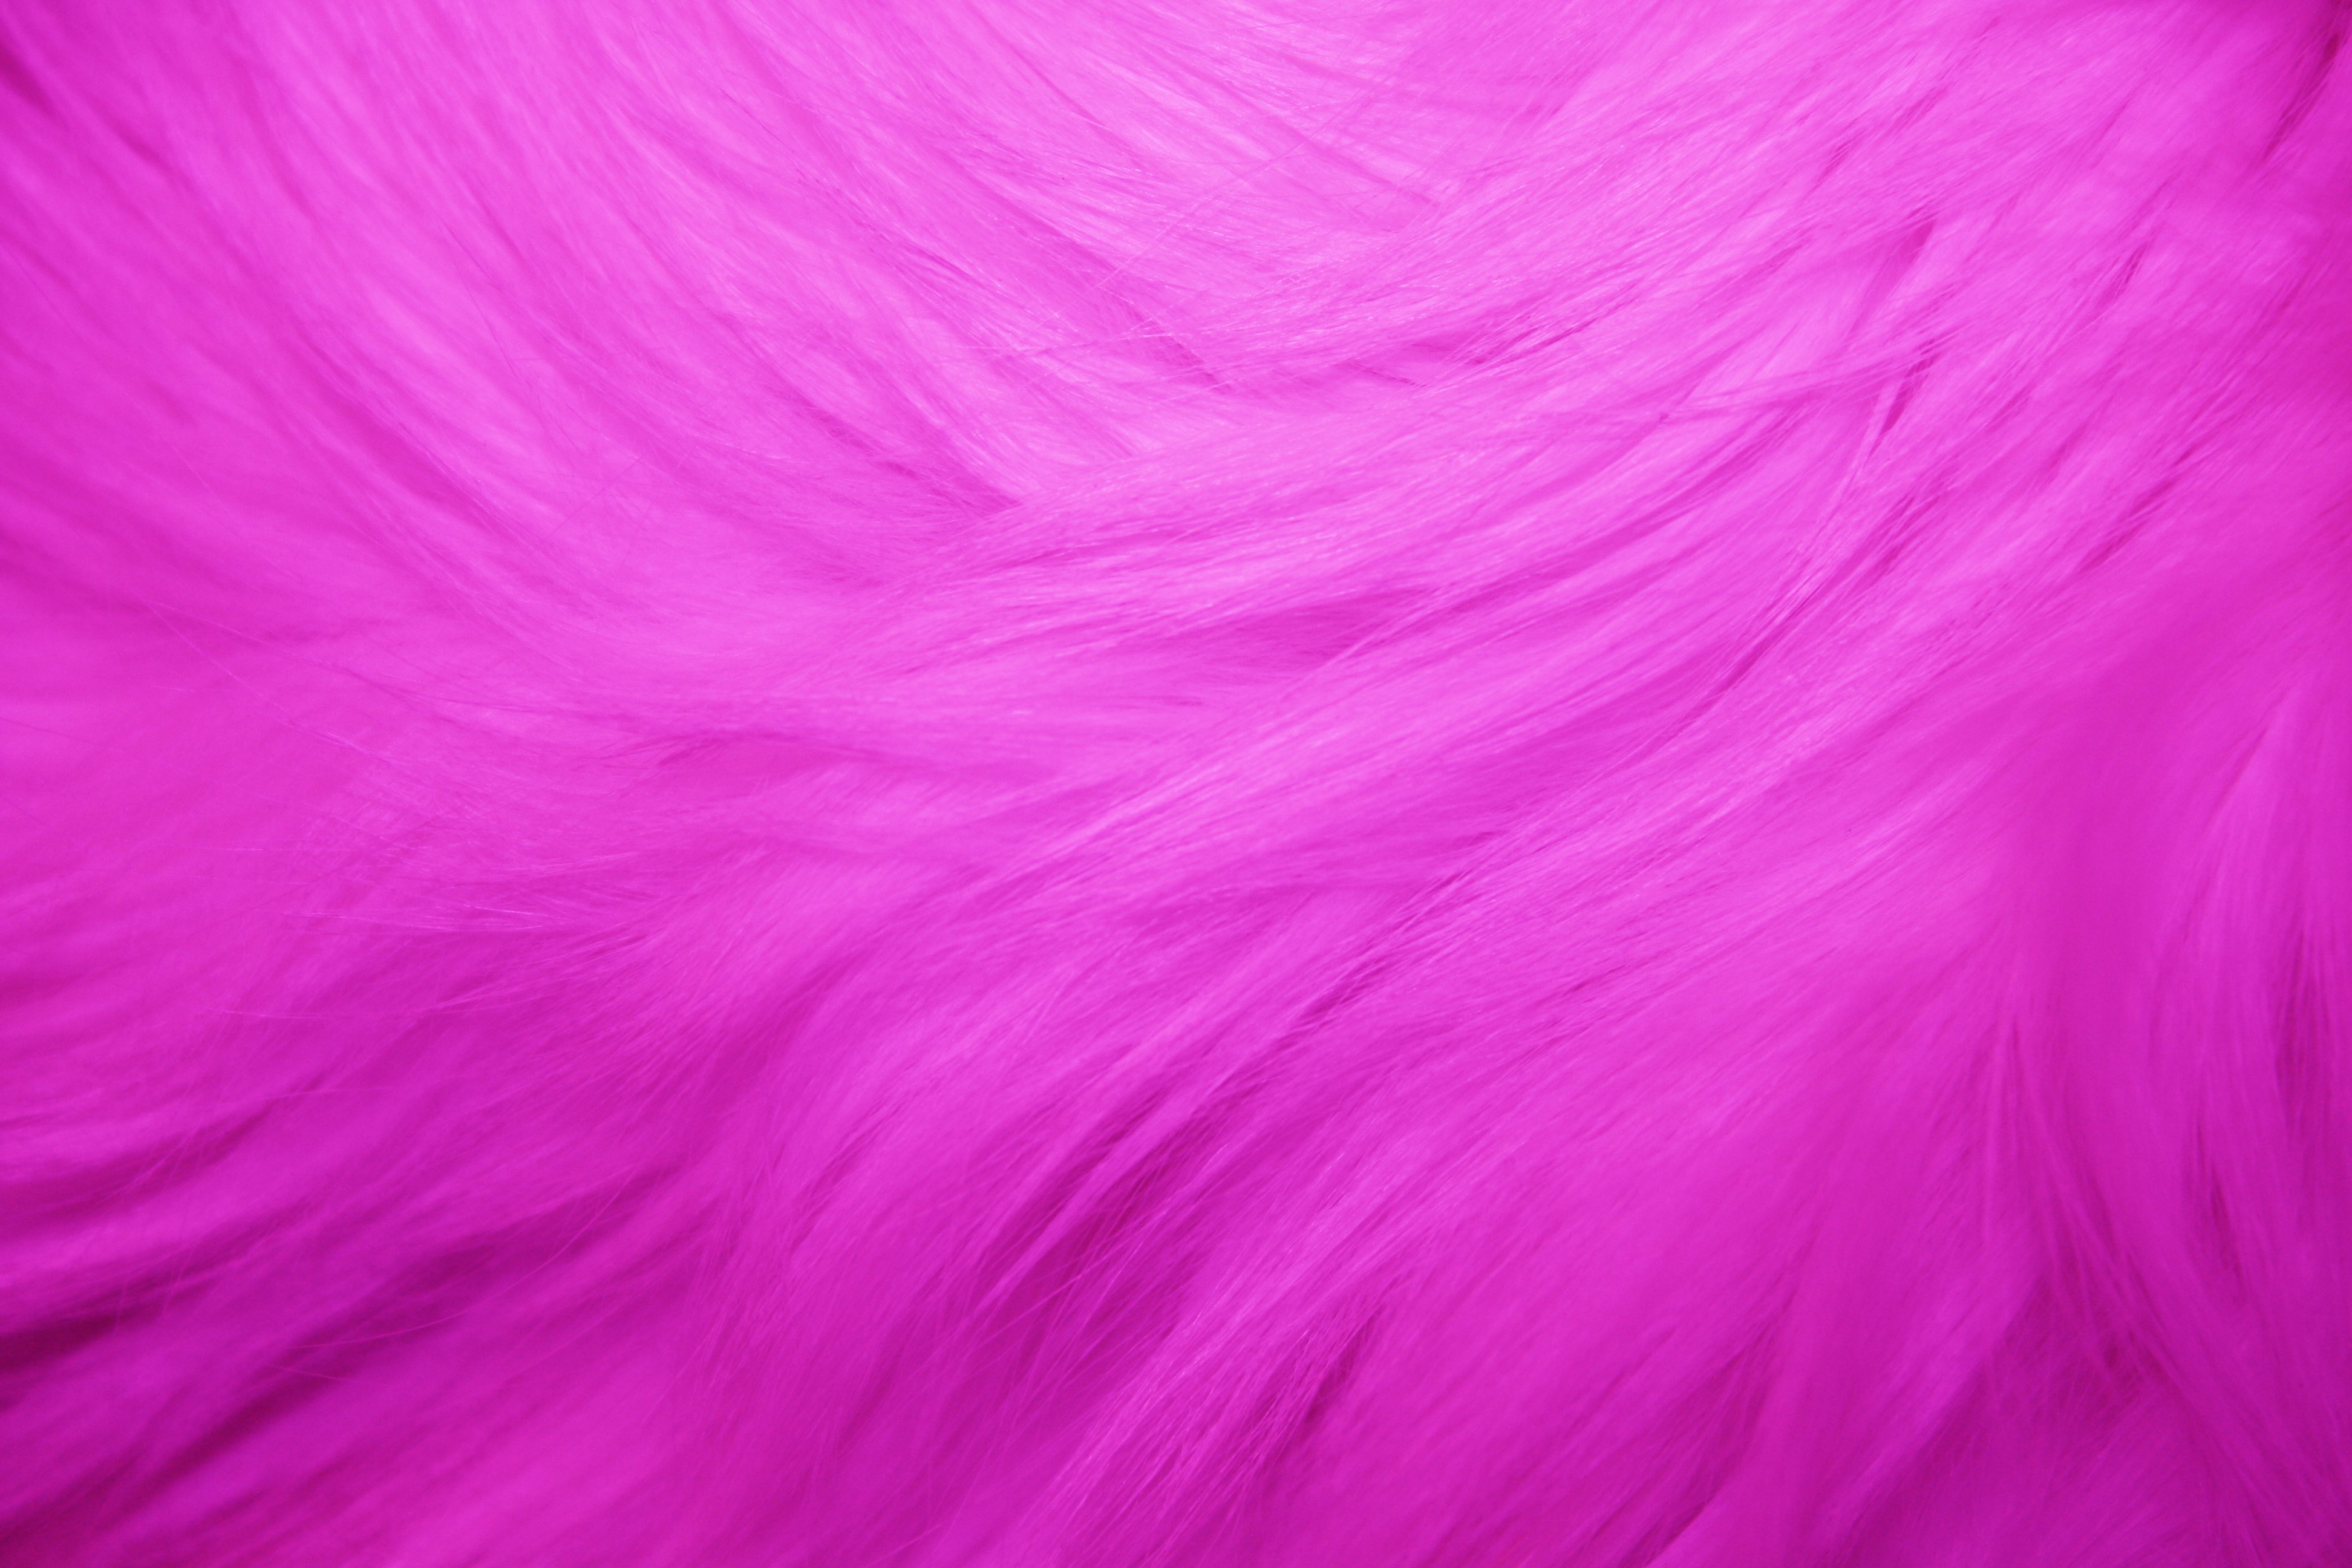 Hot Pink Fur Texture   Free High Resolution Photo   Dimensions 3888